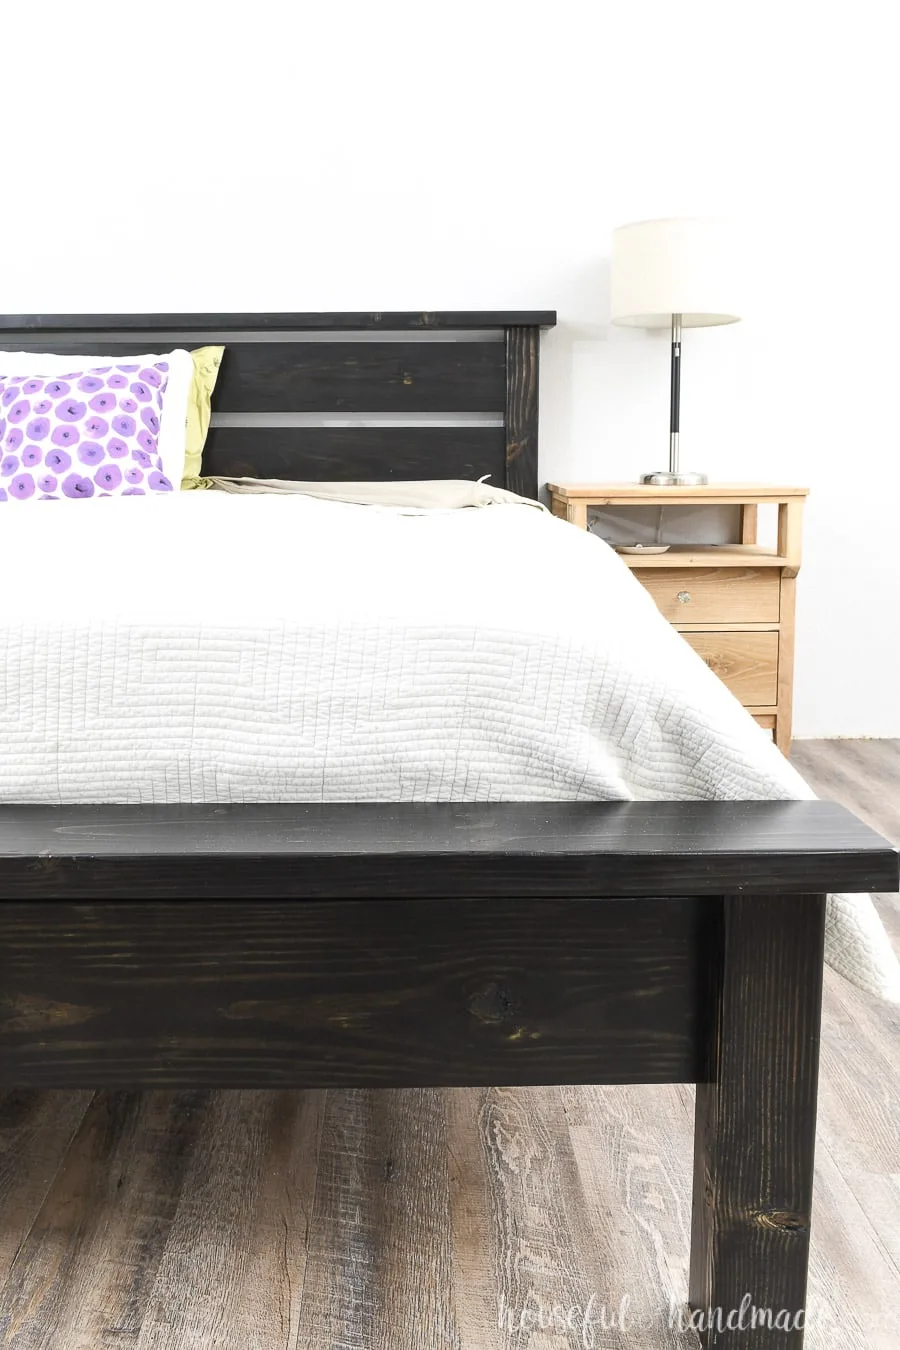 DIY platform bed that looks like a traditional bed with a slatted headboard sitting next to a nightstand.